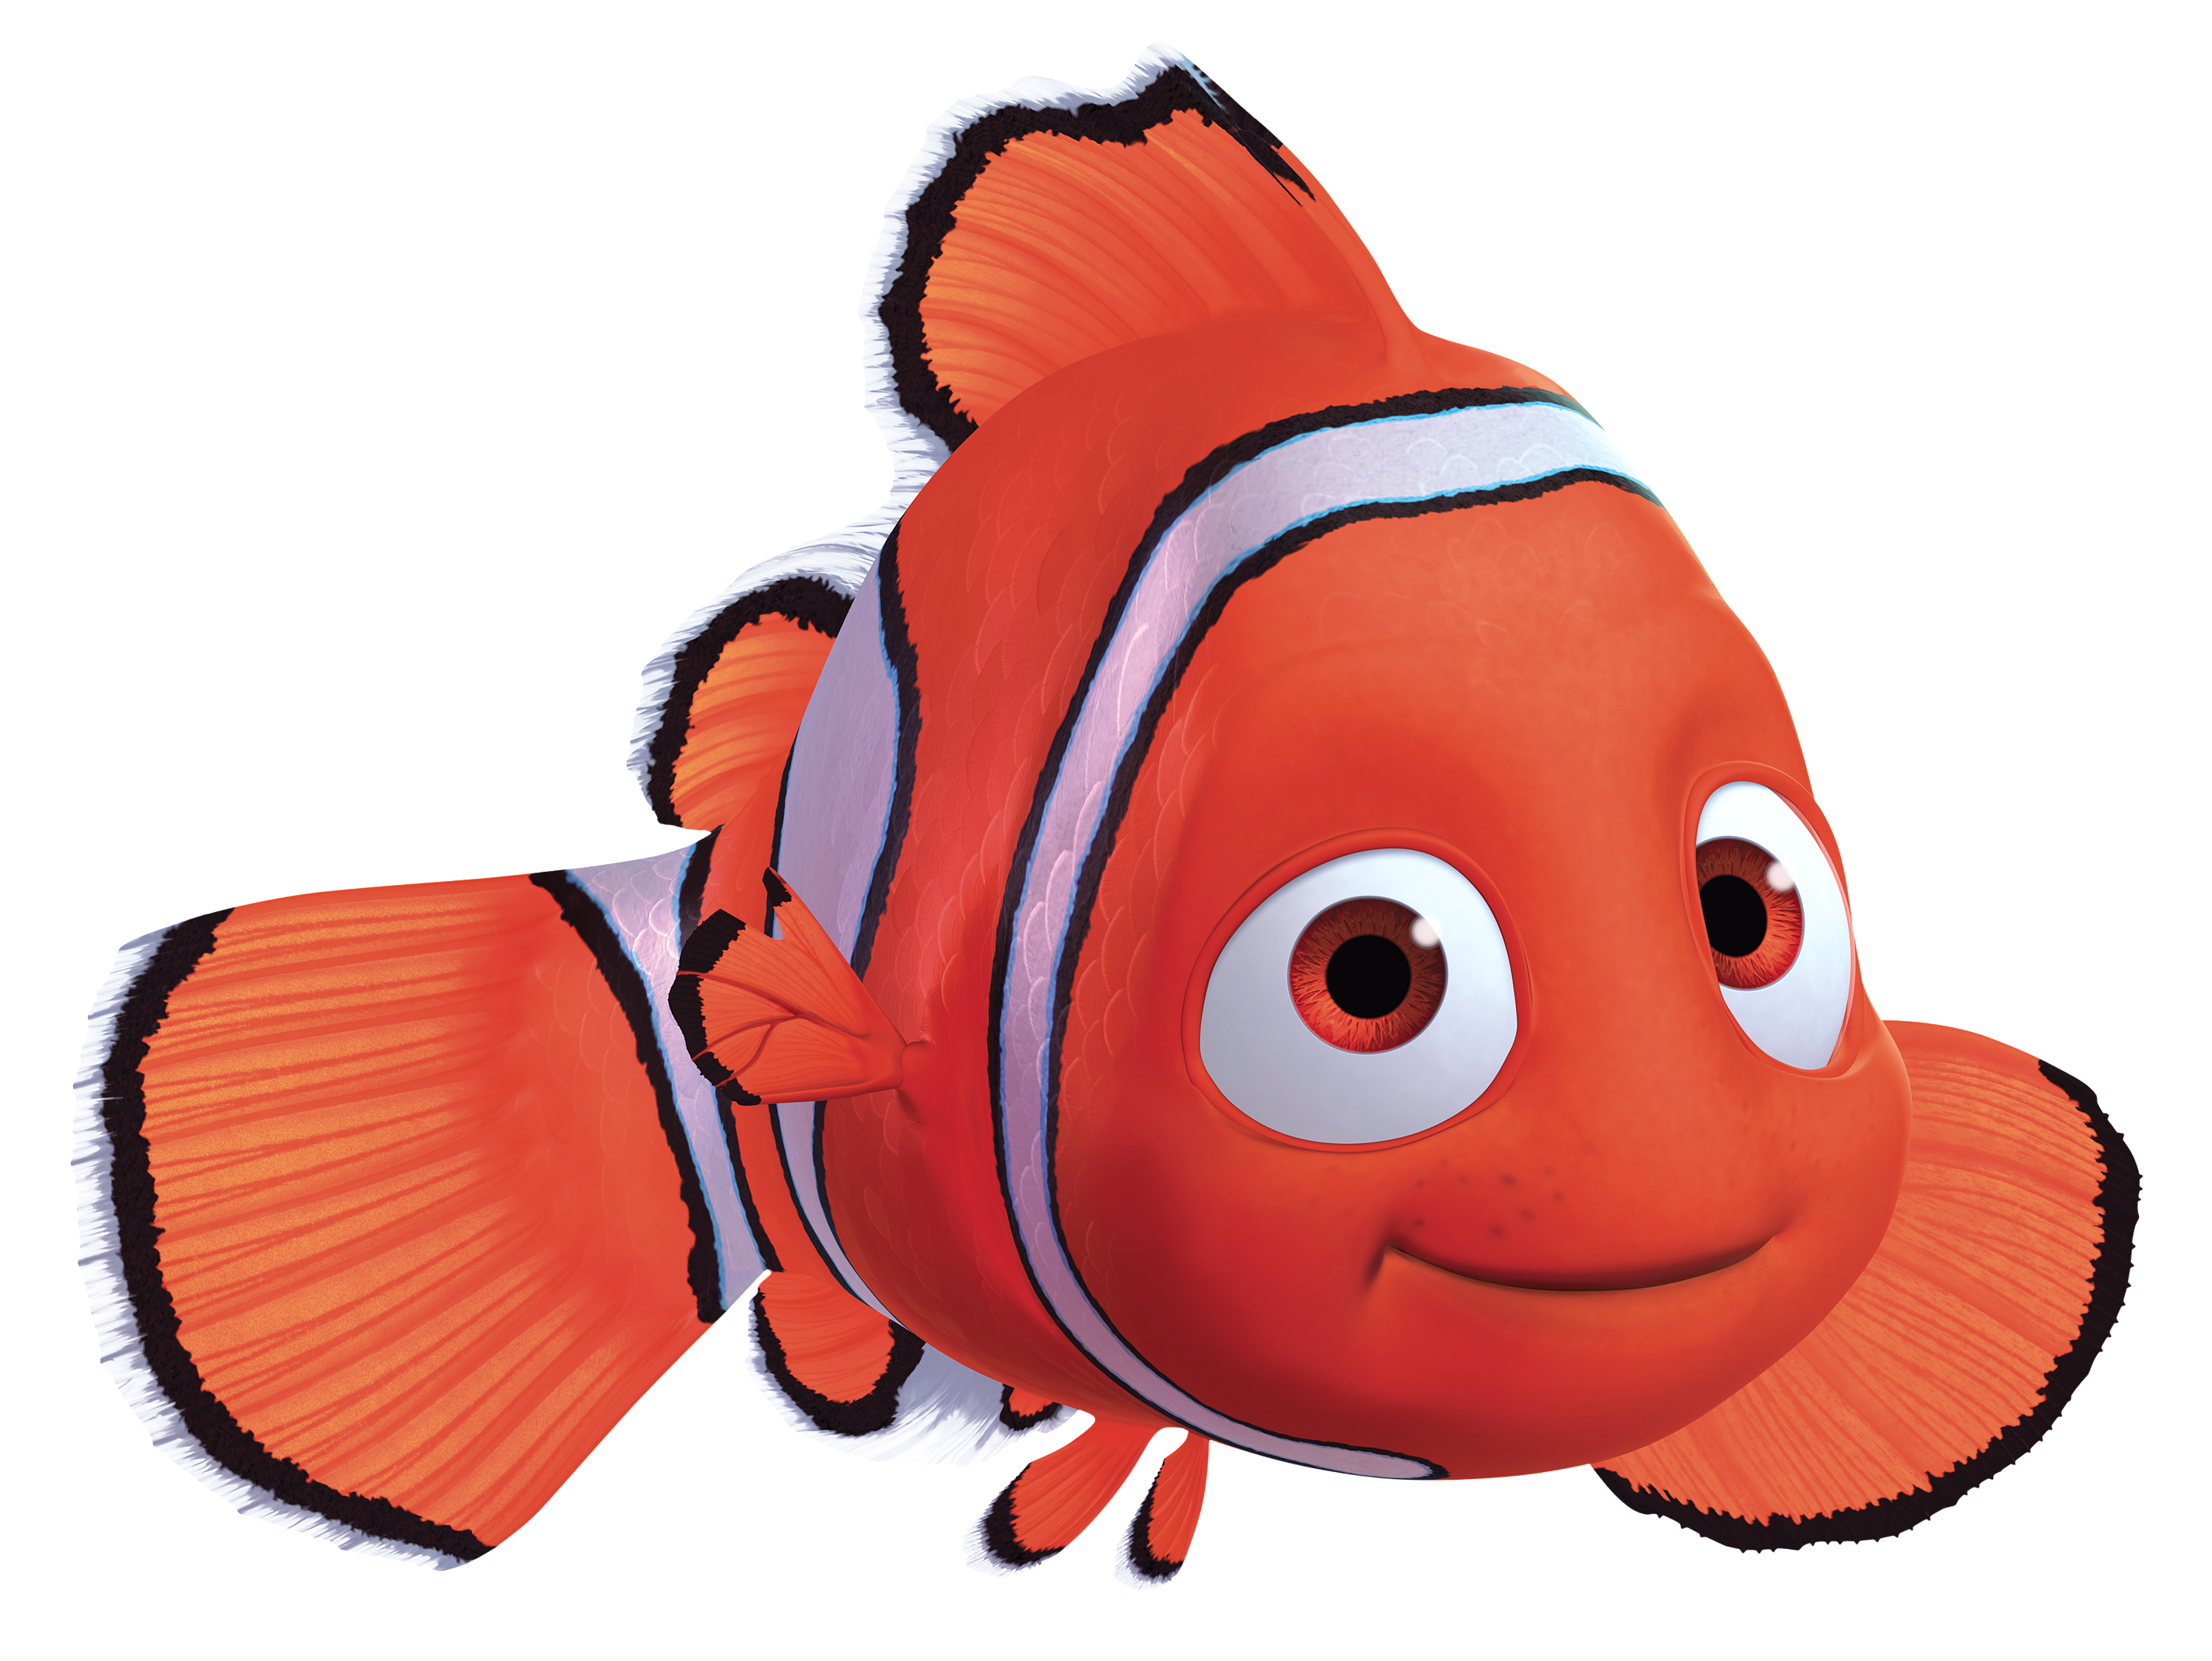 12 Nemo Cartoon Free Cliparts That You Can Download To You Computer    